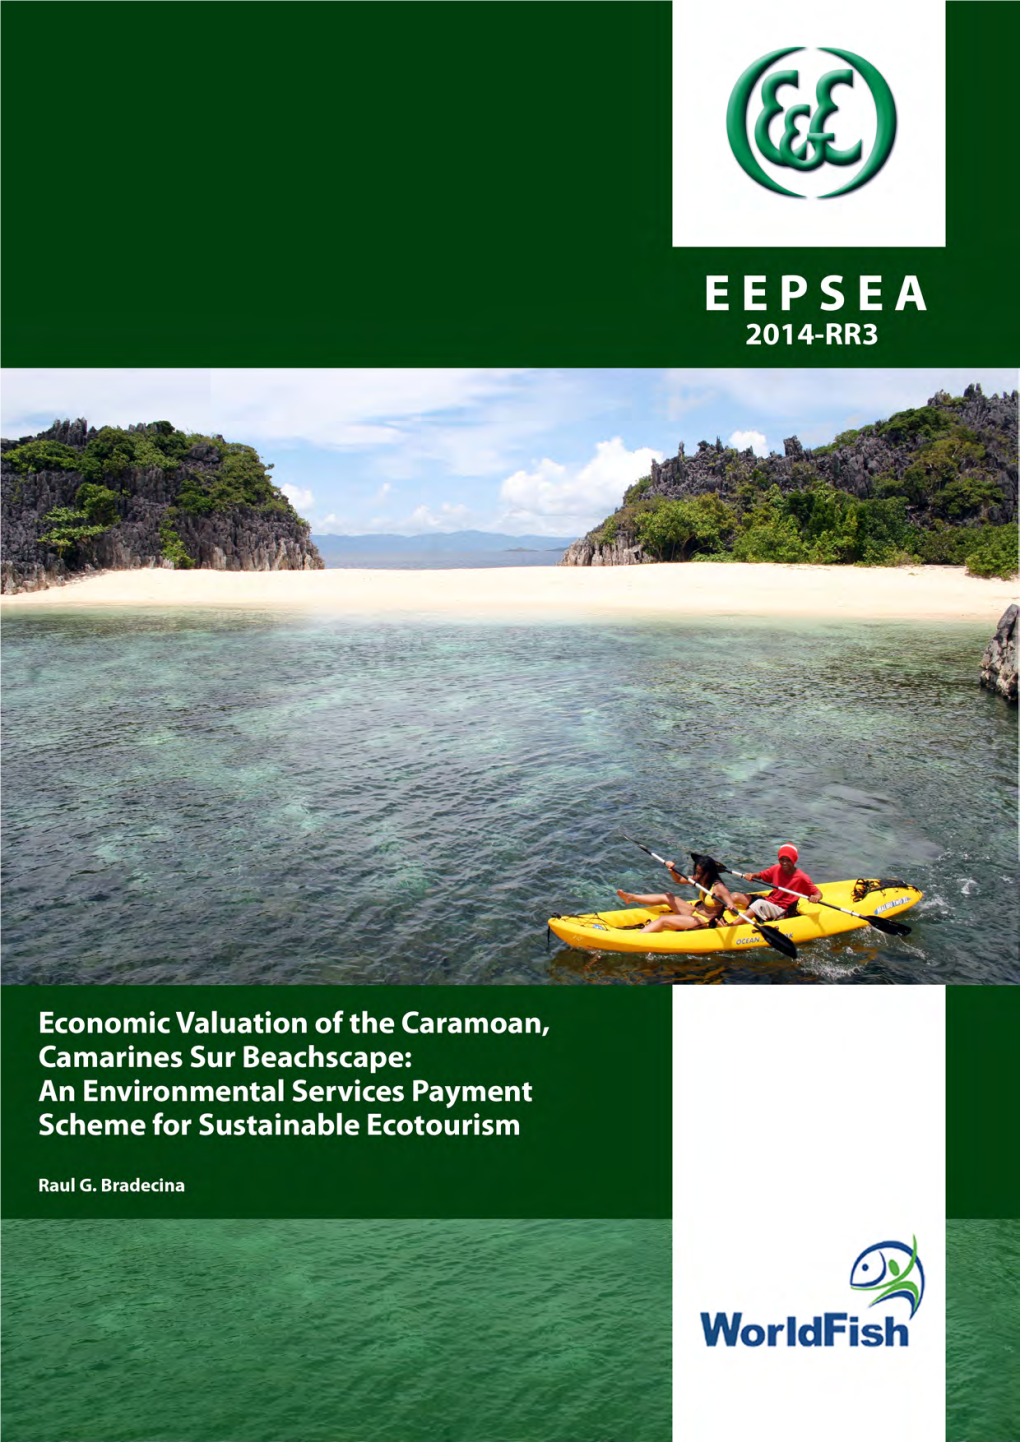 Economic Valuation of the Caramoan, Camarines Sur Beachscape: an Environmental Services Payment Scheme for Sustainable Ecotourism